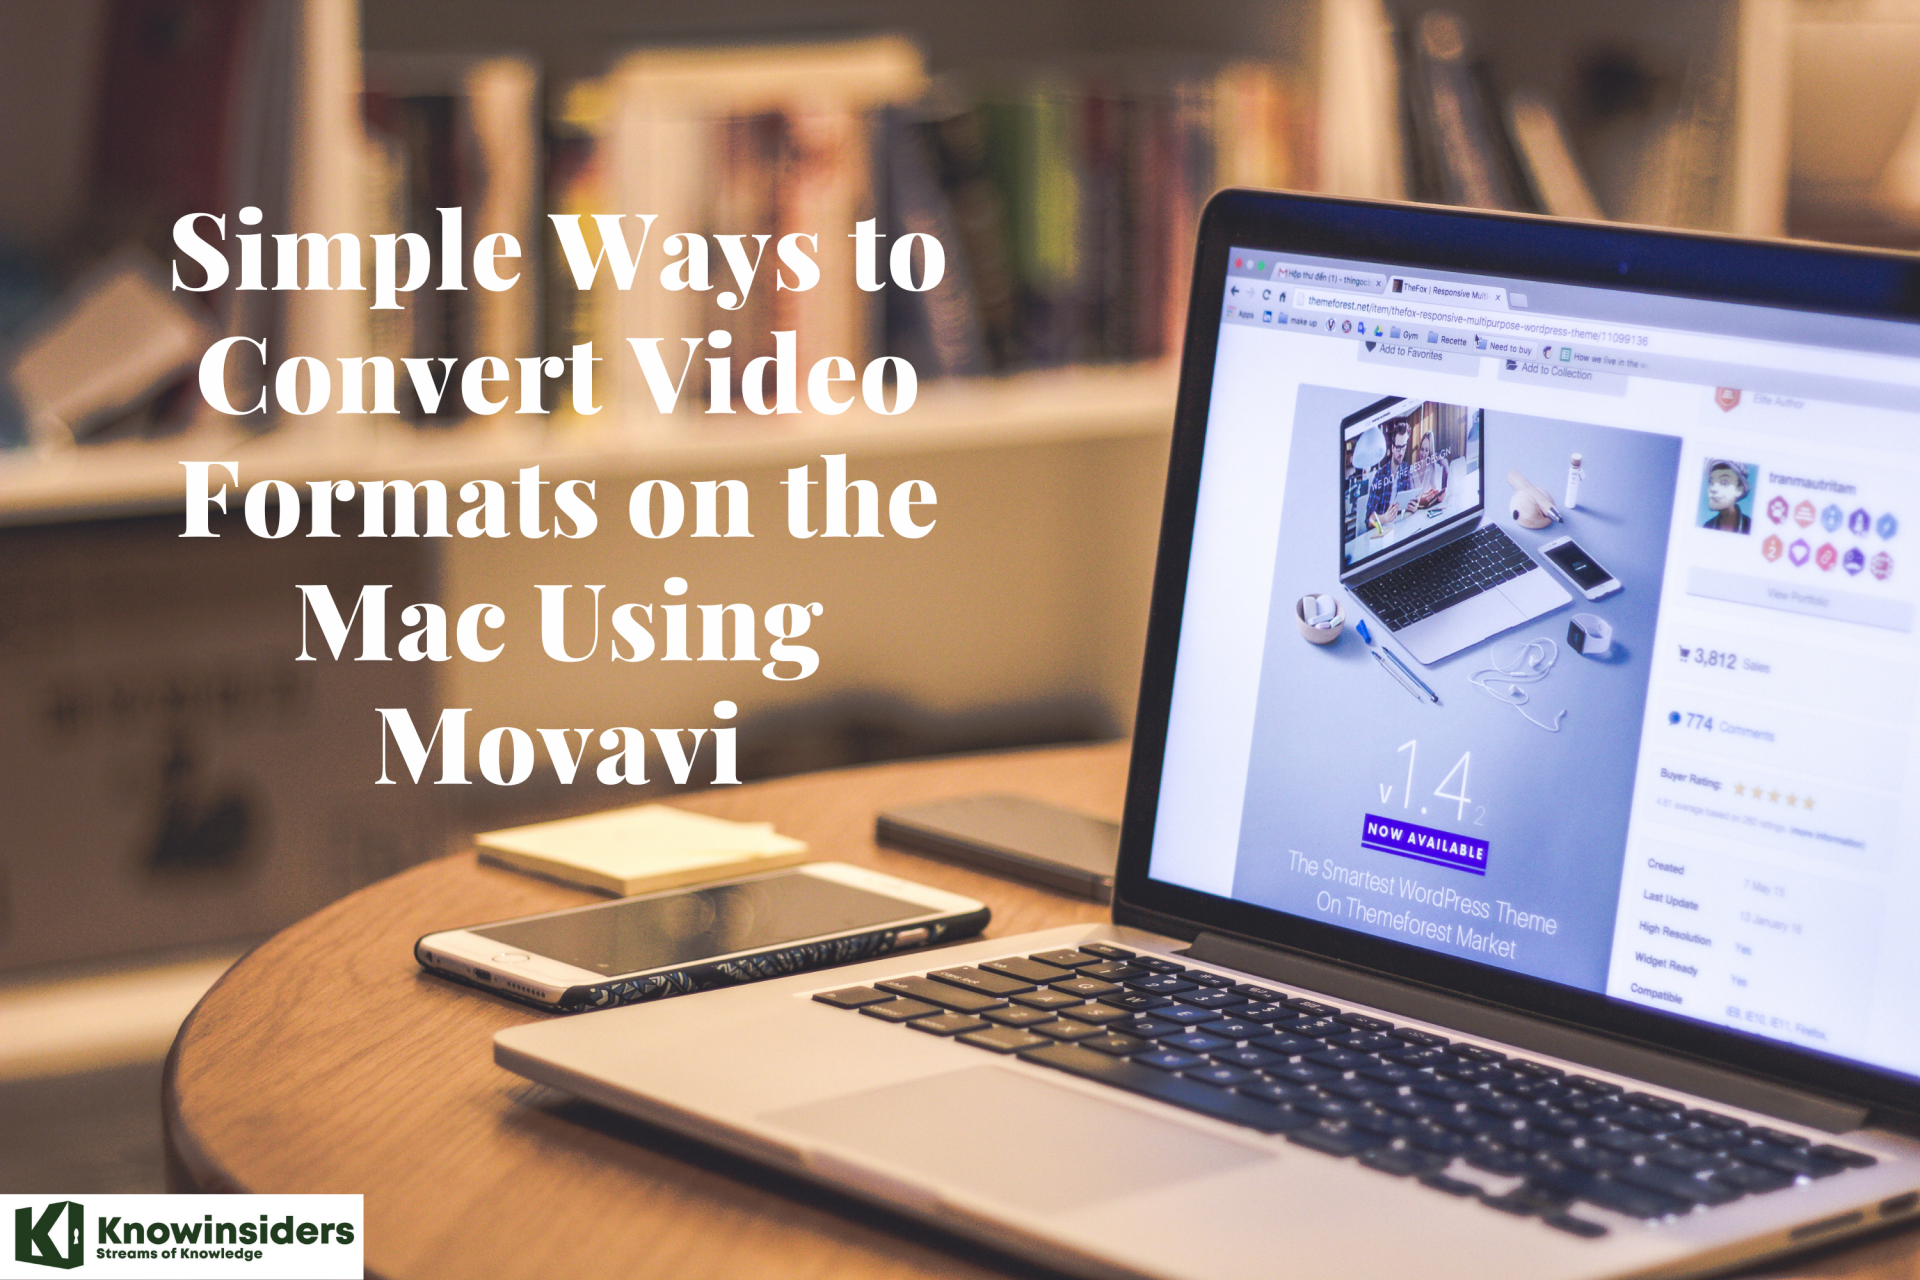 Simple Ways to Convert Video Formats on the Mac Using Movavi